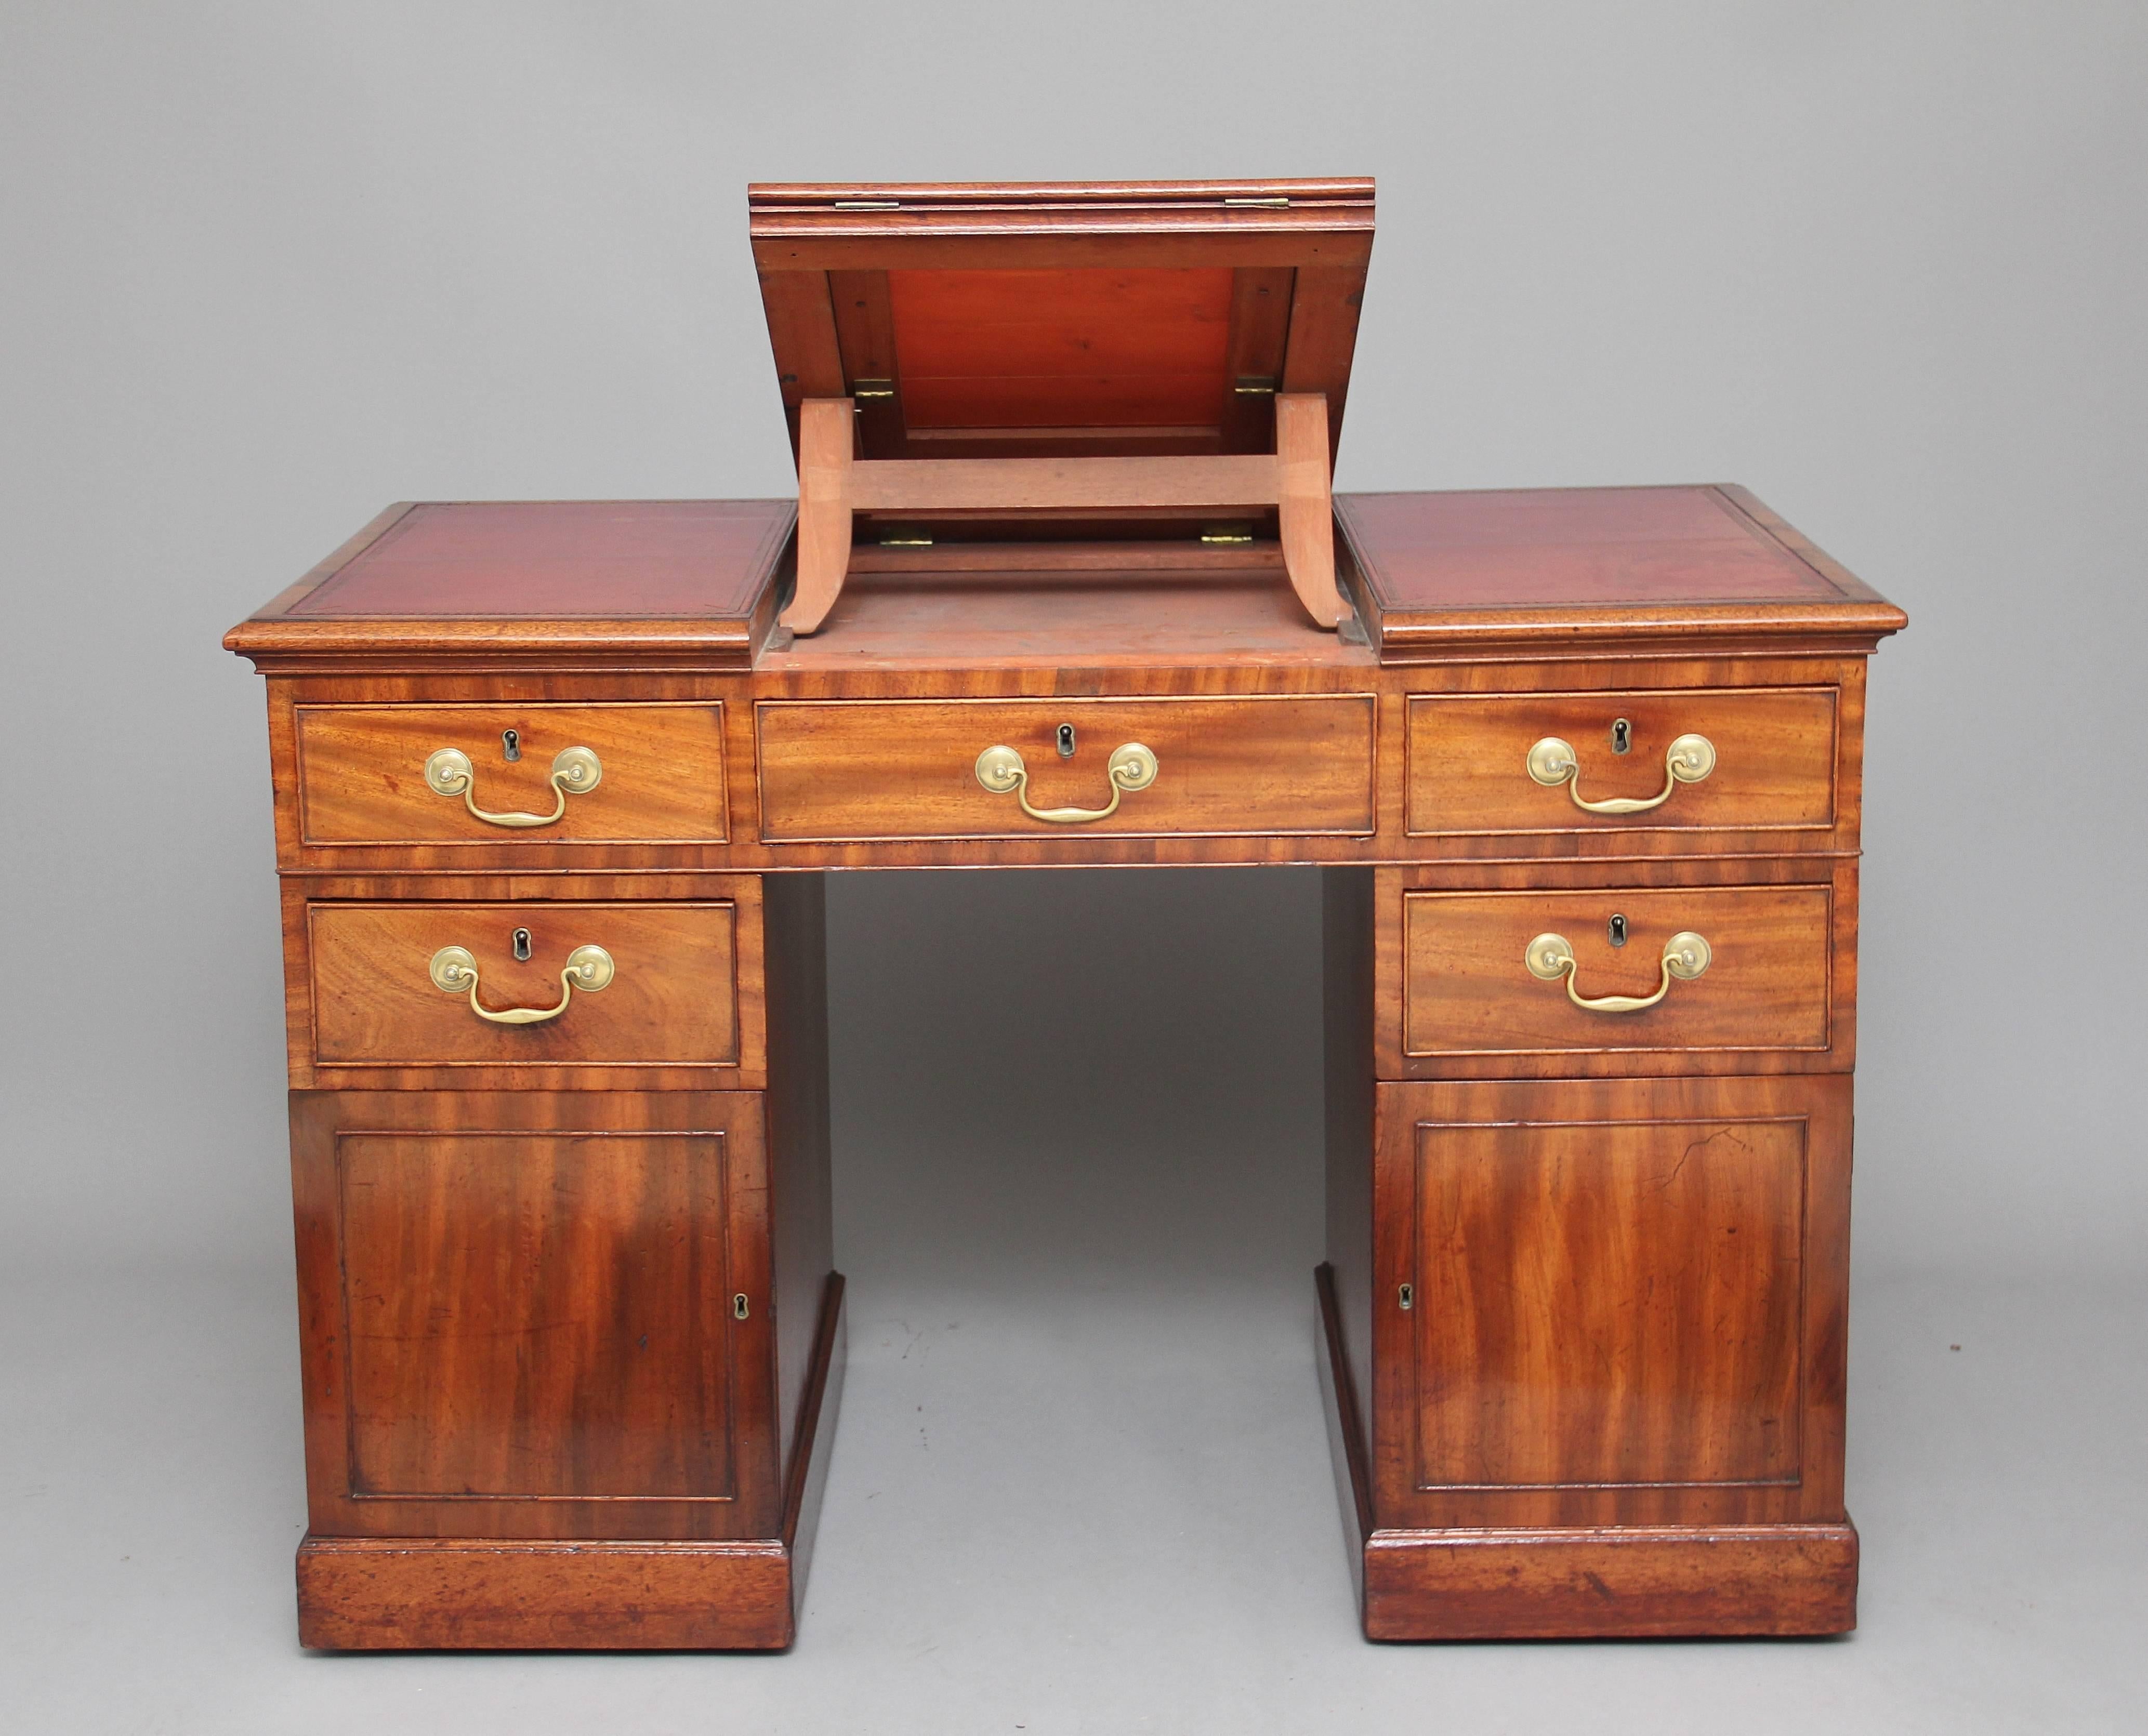 A rare early 19th century mahogany architects twin pedestal desk, the three section top having a red leather writing surface decorated with gold tooling, the middle section having a lift up ratchet mechanism which serves as an architects reading /